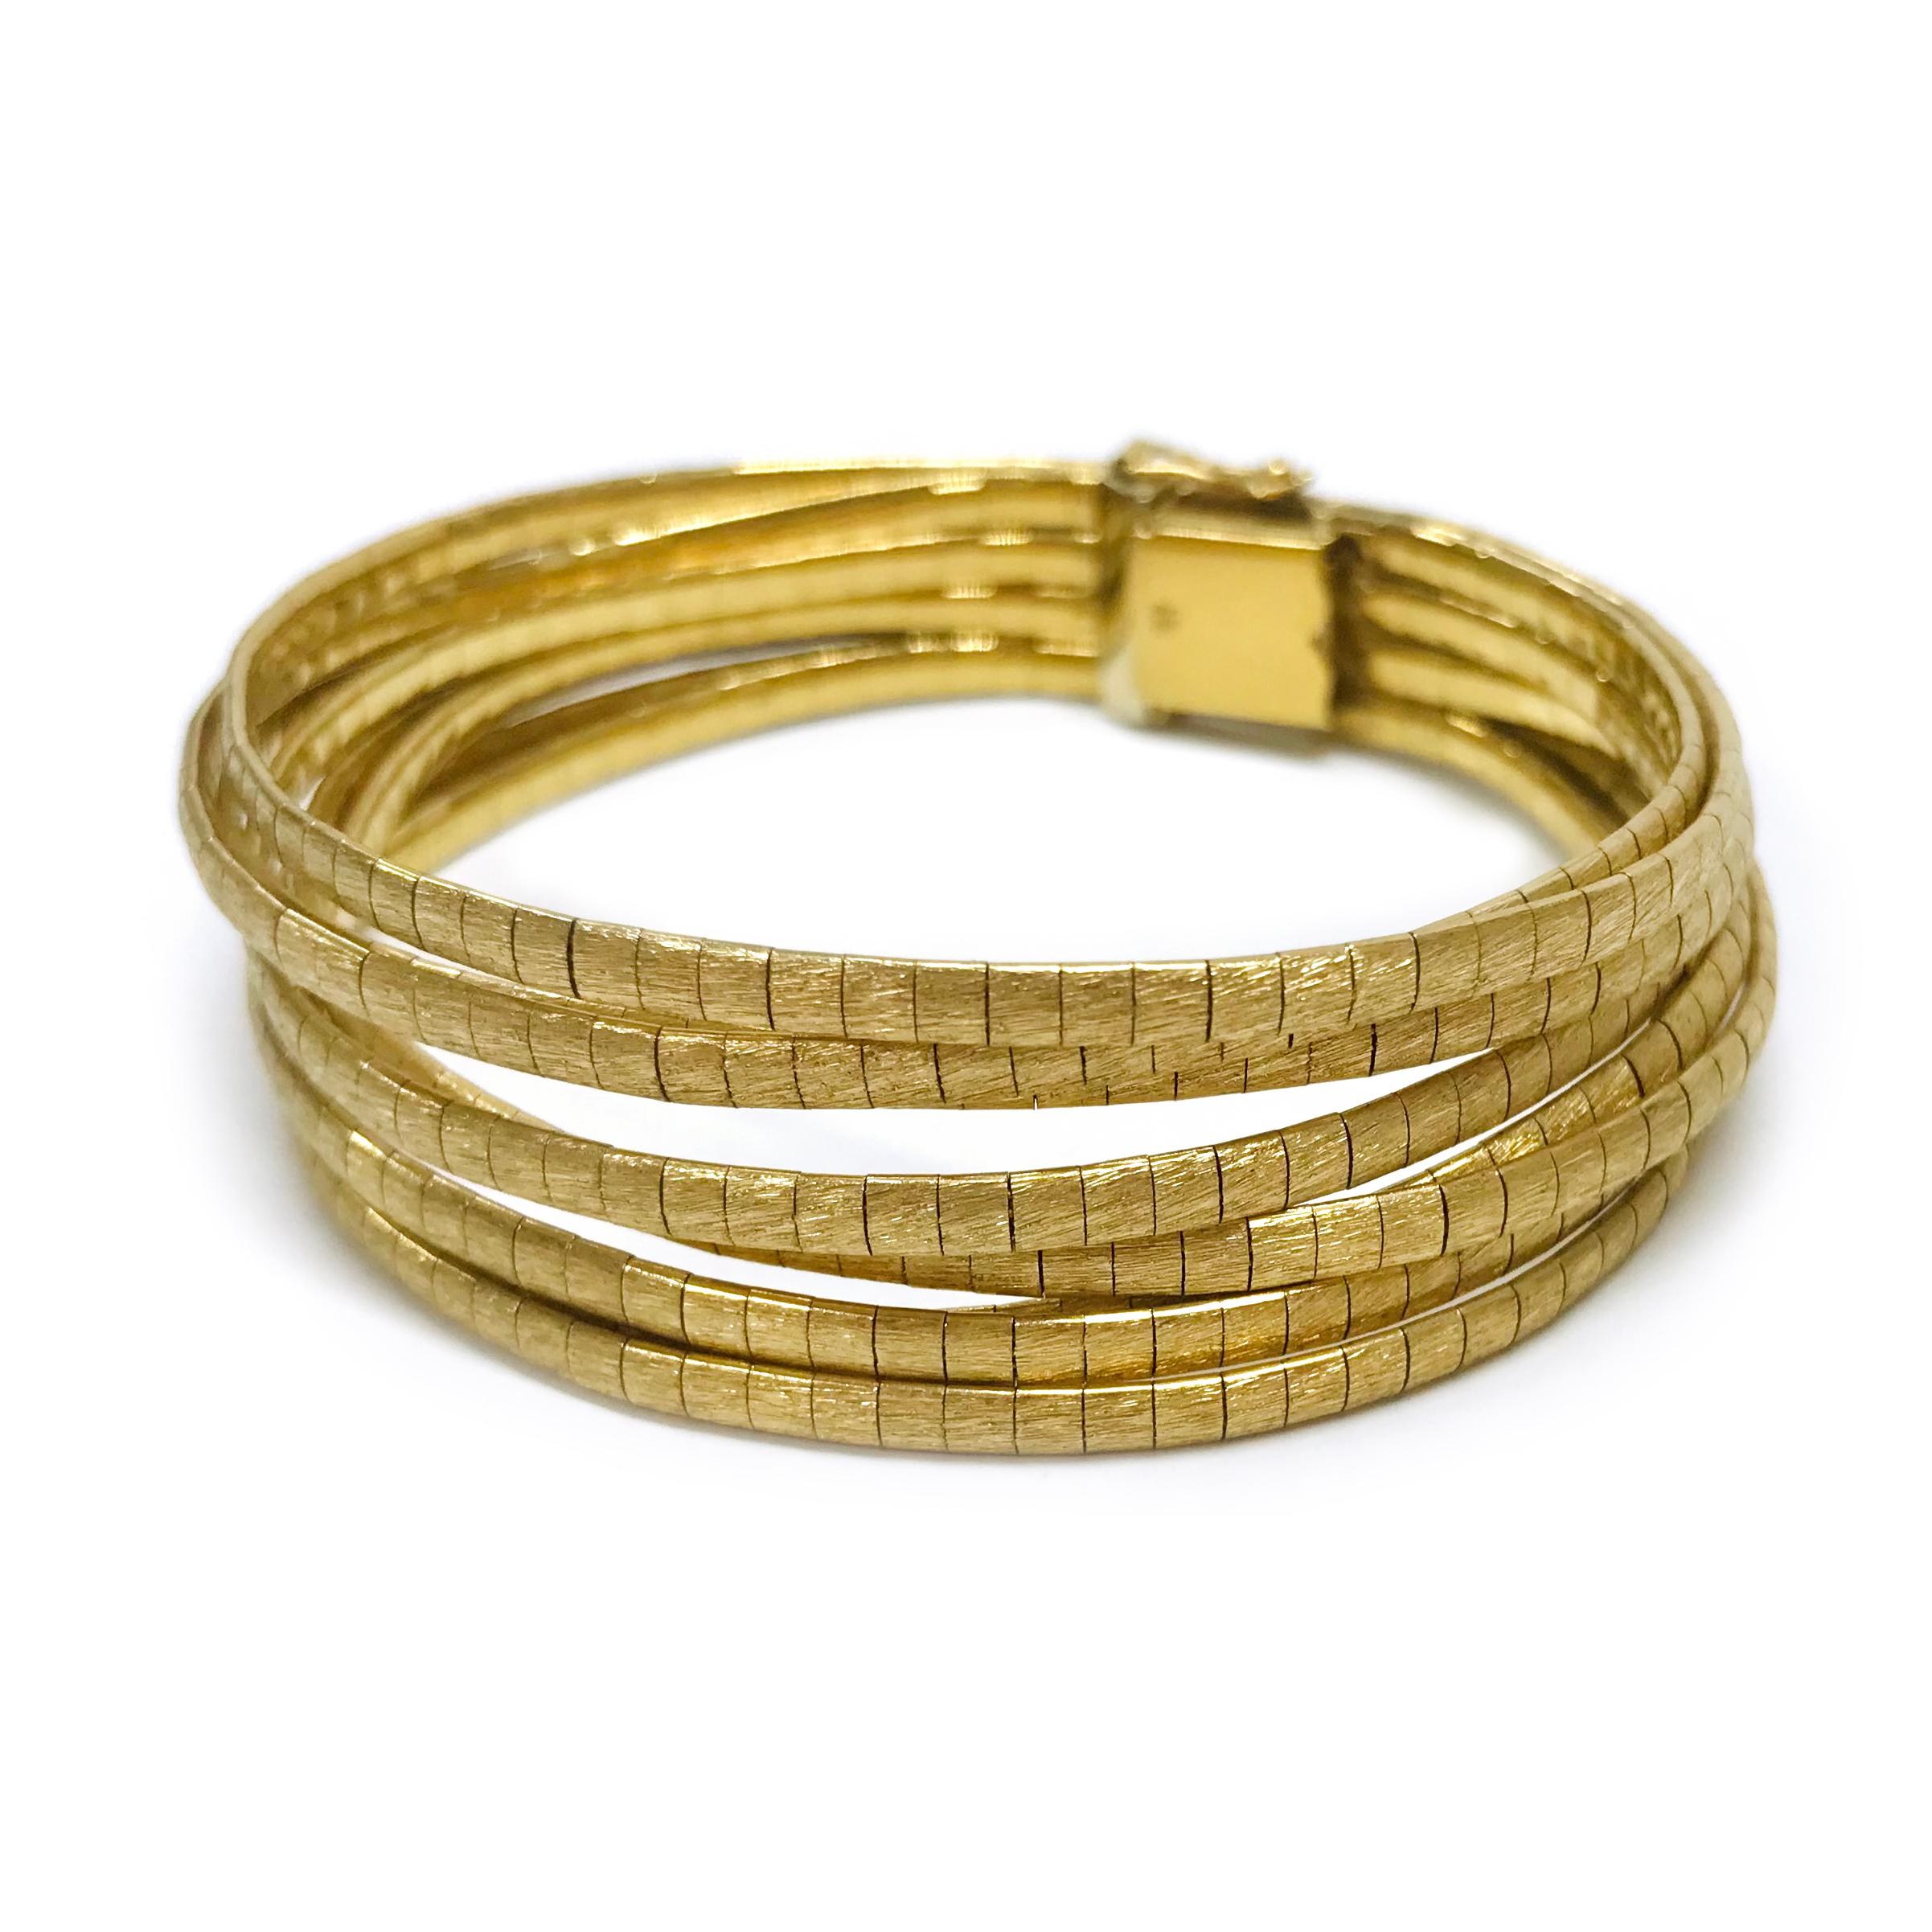 18 Karat Gold Vintage Eight-Strand Bracelet. The bracelet features a large clasp that closes two layers of strands of liquid-like gold threads, each is made from small squares. The top is Florentine finish and the underside is smooth. On the clasp